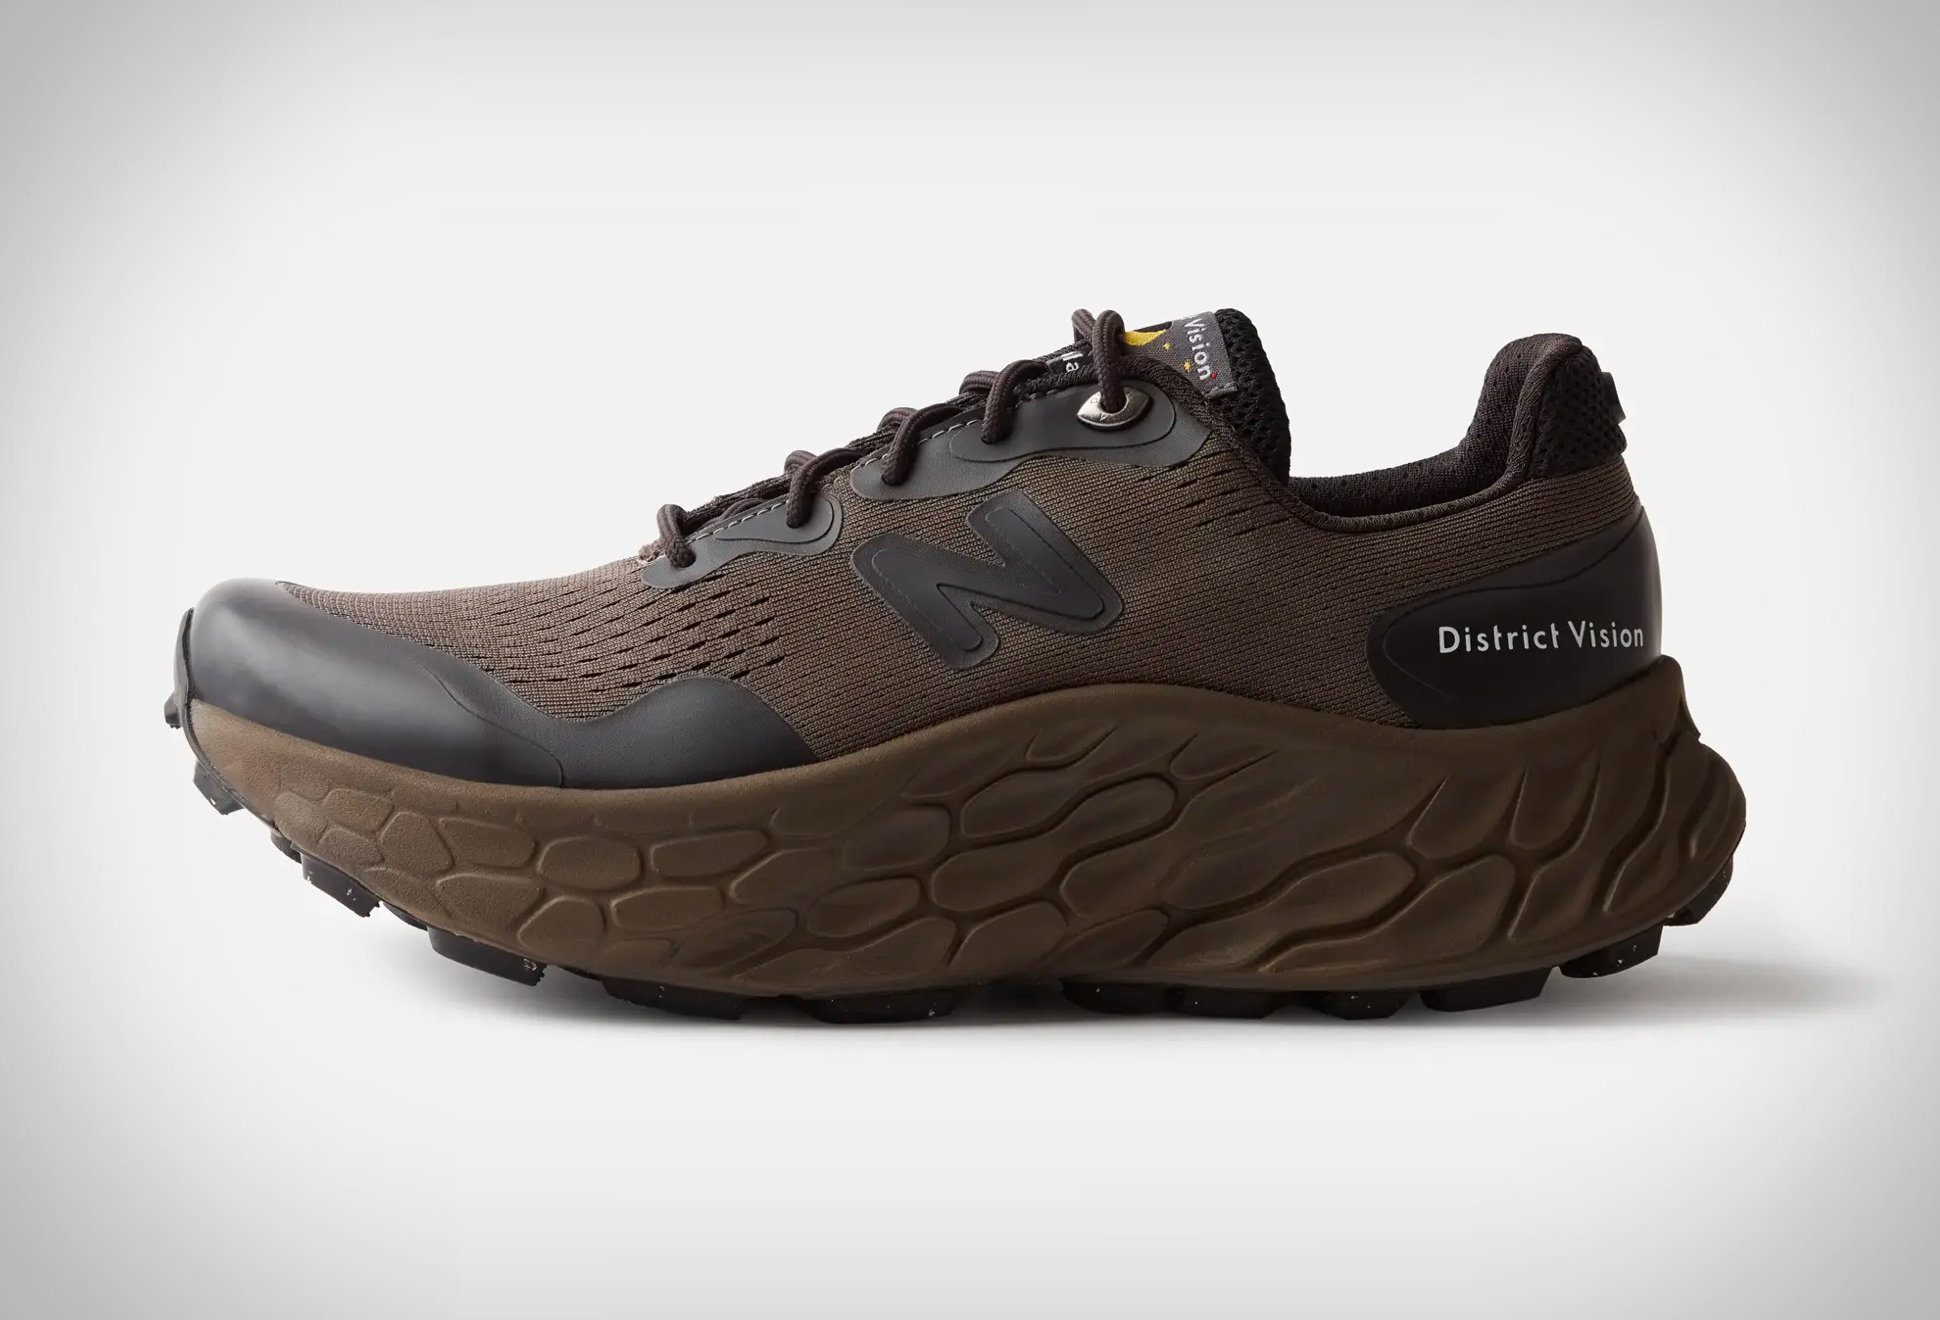 District Vision x New Balance Trail Running Shoe | Image